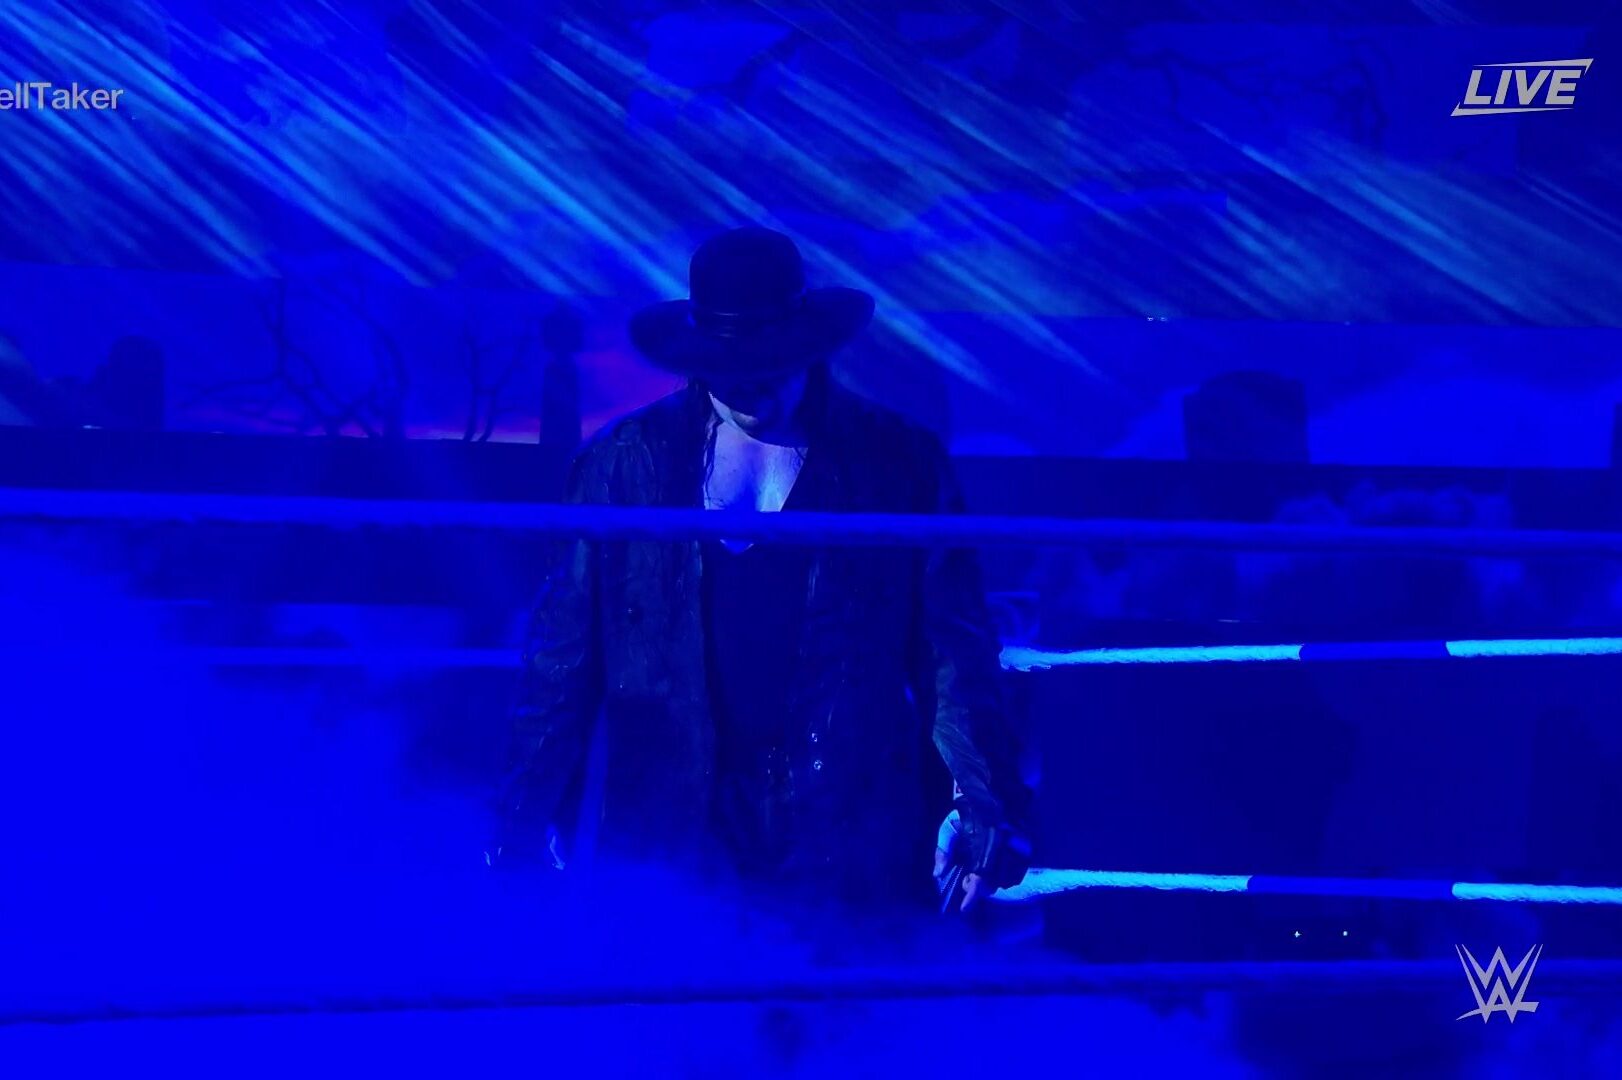 'Rest in peace' homage as The Undertaker retires after 30 years wrestling career